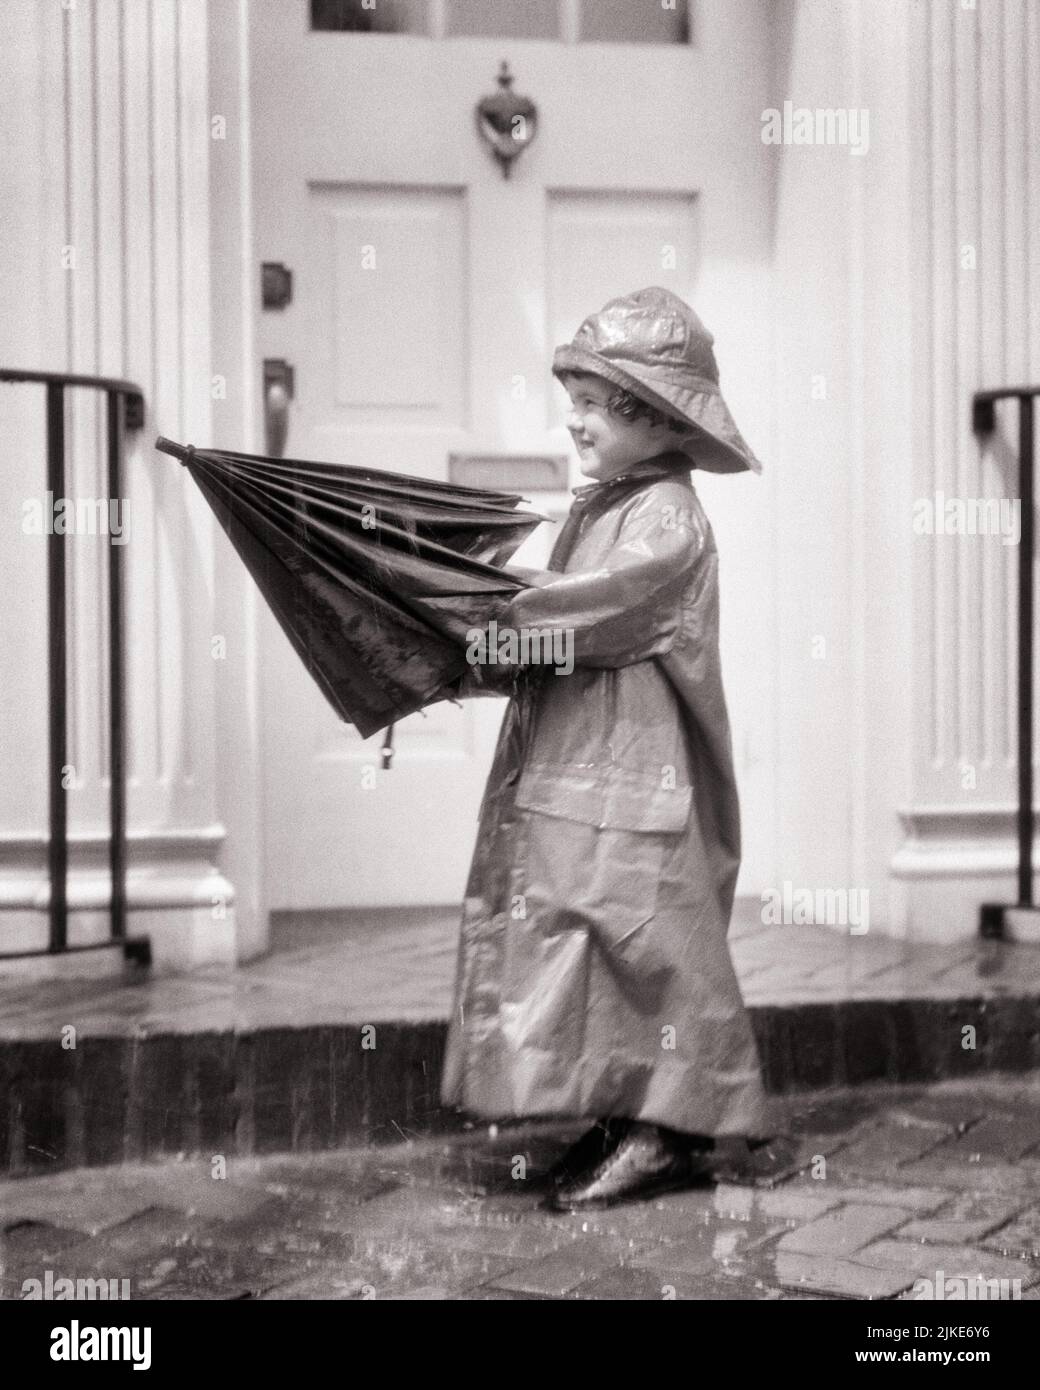 1920s LITTLE GIRL IN THE RAIN WEARING LONG RAIN COAT AND HAT SOU’WESTER FOUL WEATHER GEAR AND PUTTING UP AN UMBRELLA - j1280 HAR001 HARS WINNING HOME LIFE FULL-LENGTH RAINY RESIDENTIAL CUTOUT RAINING BUILDINGS B&W CHEERFUL ADVENTURE AND EXCITEMENT UP HOMES SMILES JOYFUL RESIDENCE FRONT DOOR FOUL PLEASANT AGREEABLE CHARMING FOUL WEATHER JUVENILES LOVABLE PLEASING ADORABLE APPEALING BLACK AND WHITE CAUCASIAN ETHNICITY HAR001 OLD FASHIONED Stock Photo